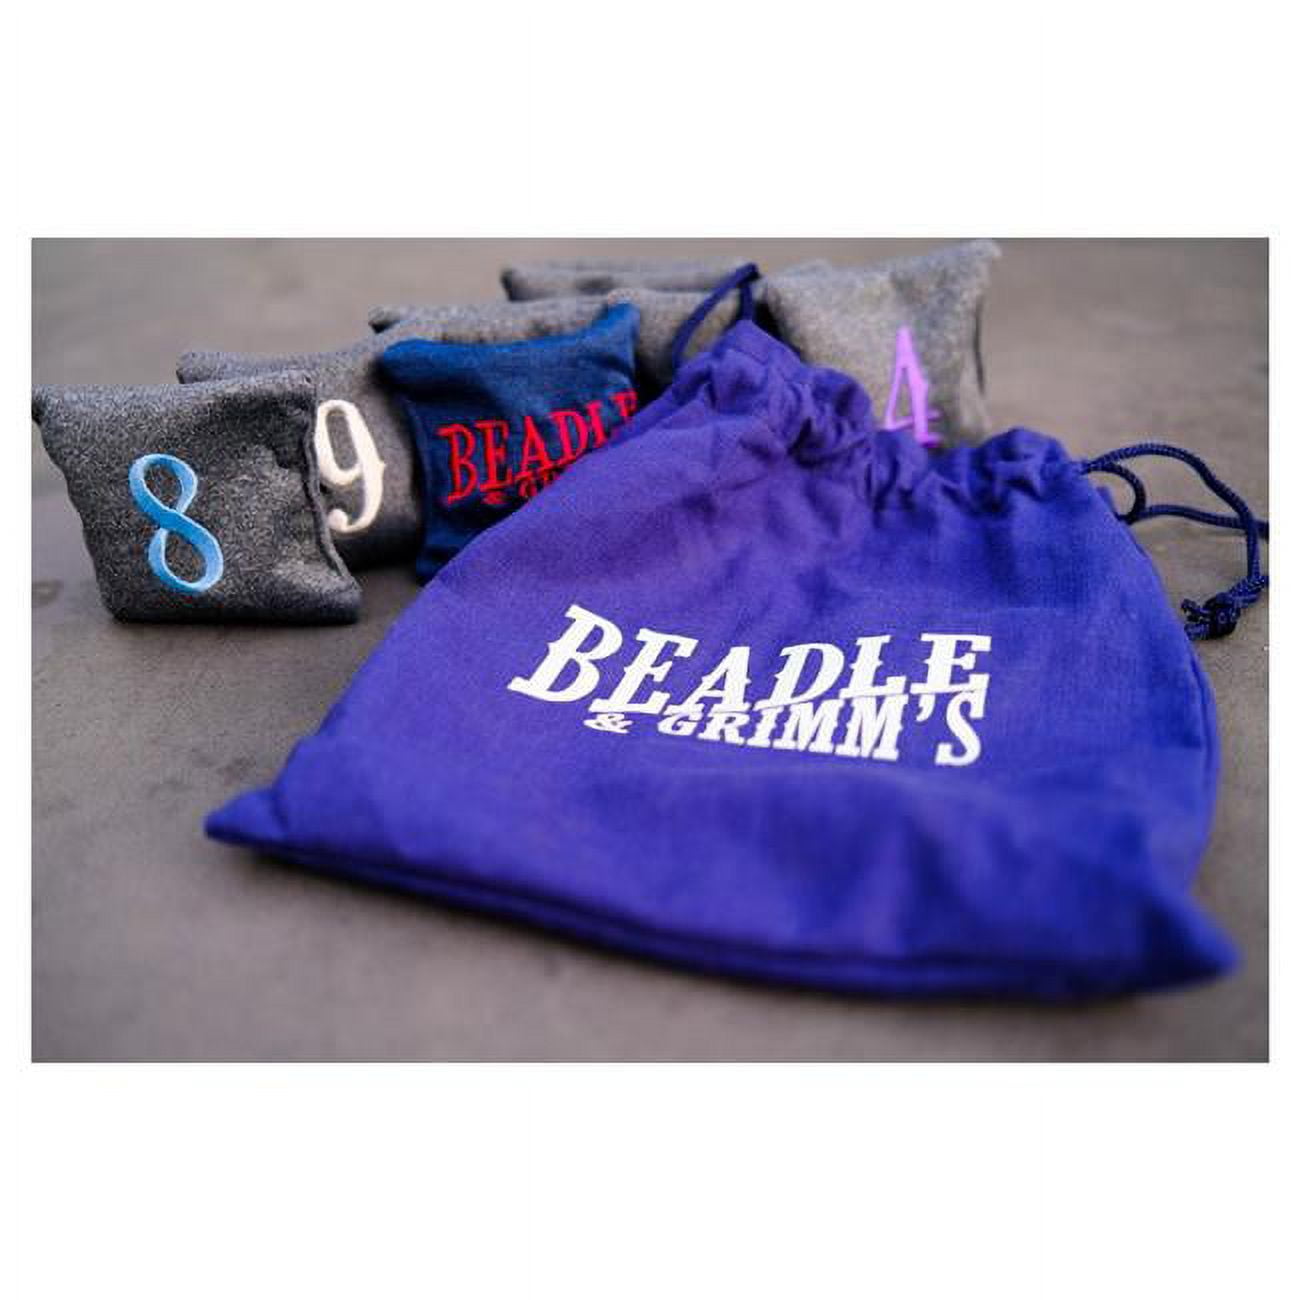 Picture of Beadle & Grimms BAG0021 Roll Inish Initiative Beanbag Set Roleplaying Game